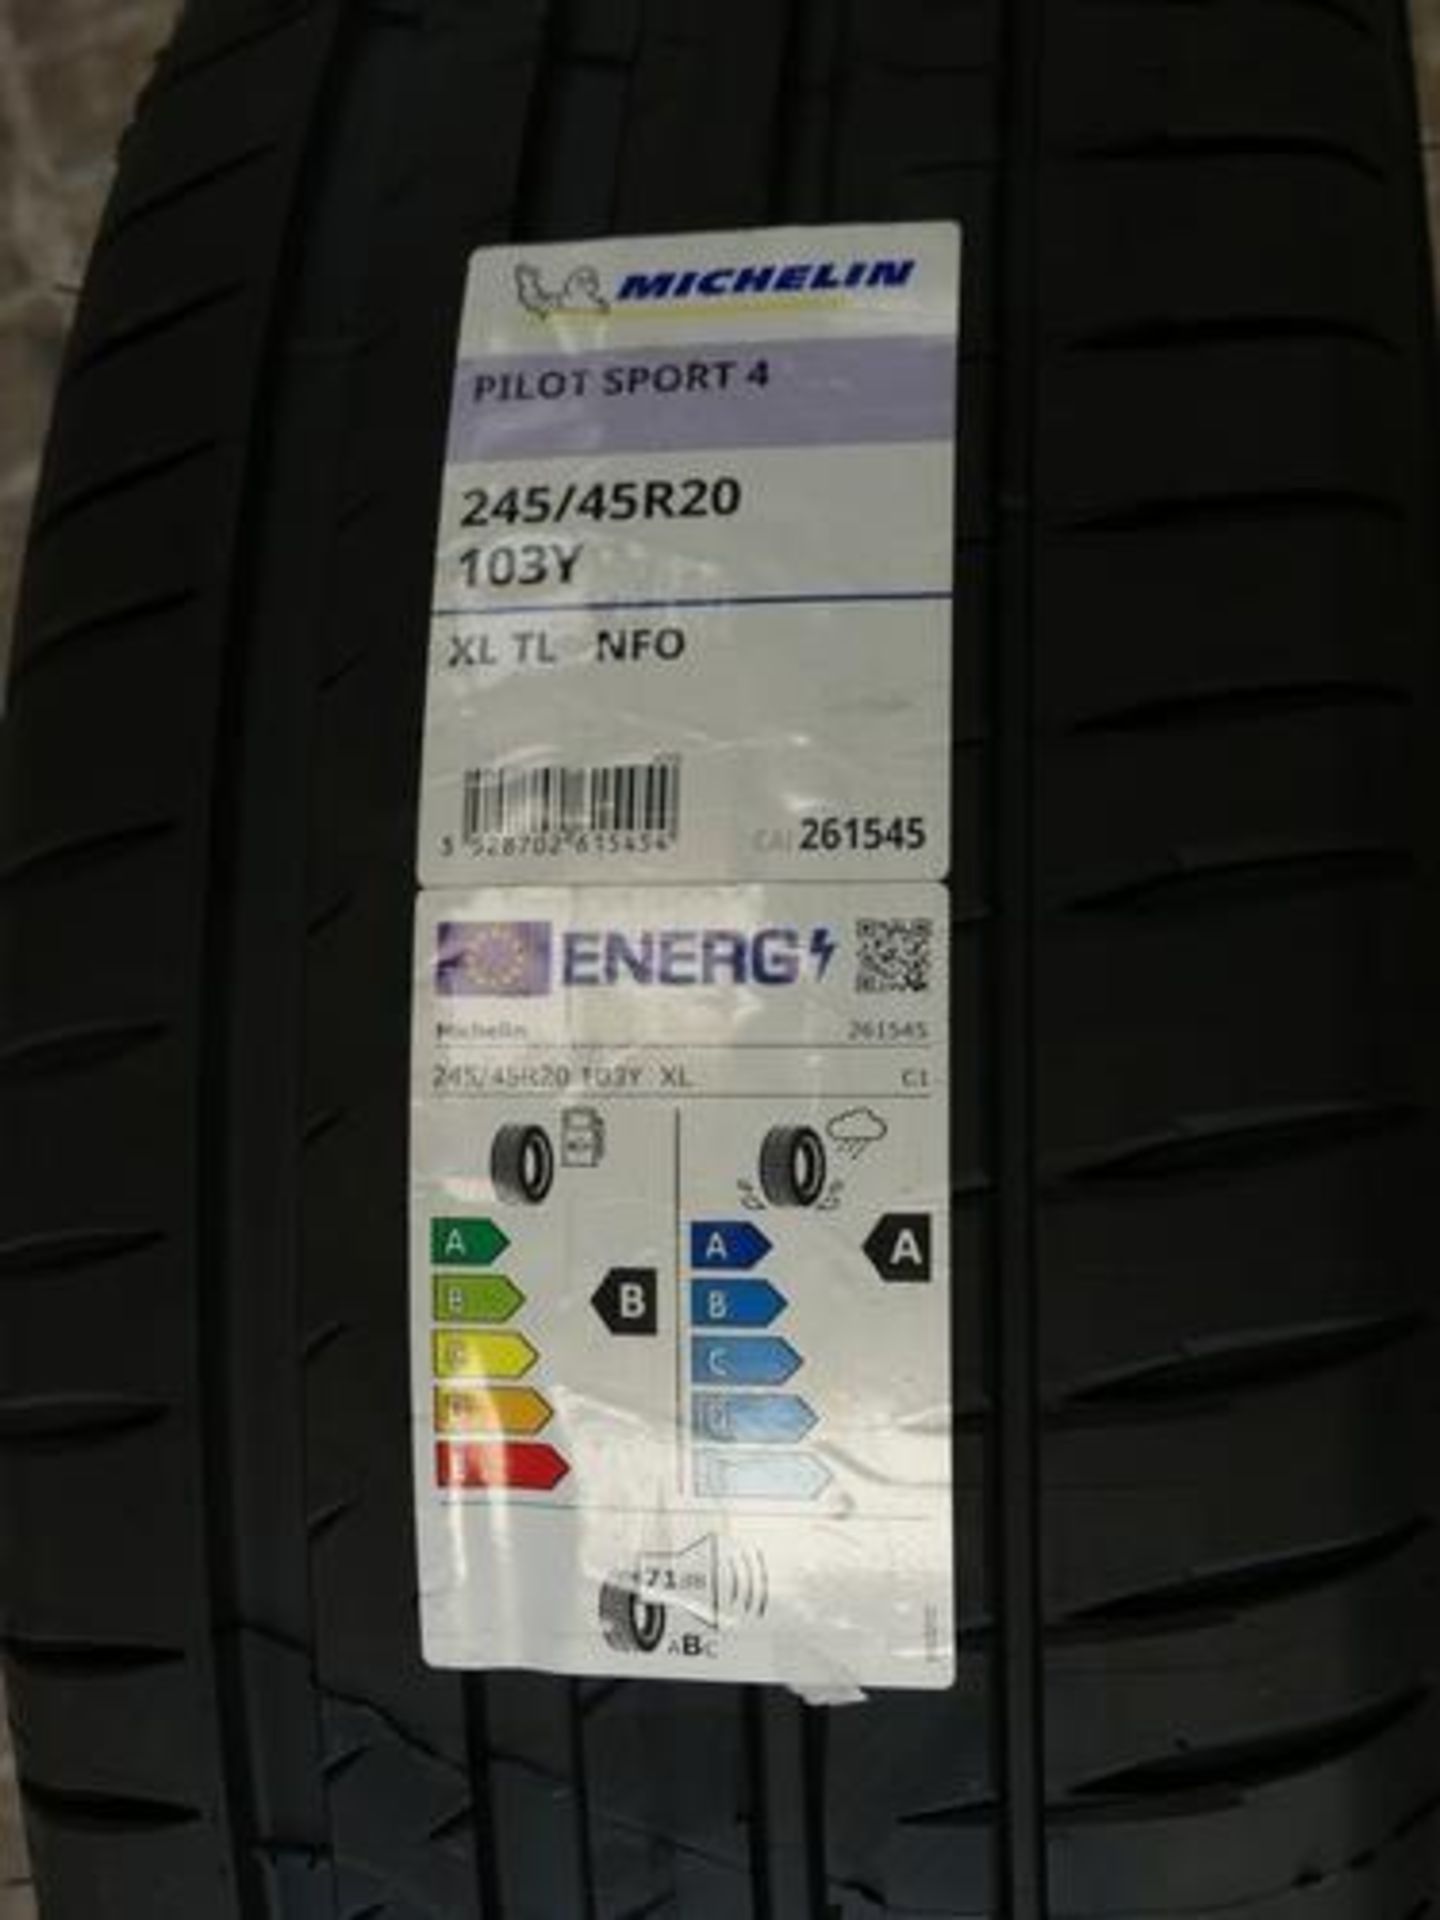 1 x Michelin Pilot Sport 4 tyre, size 245/45R20 103Y - New with label (pallet 1)